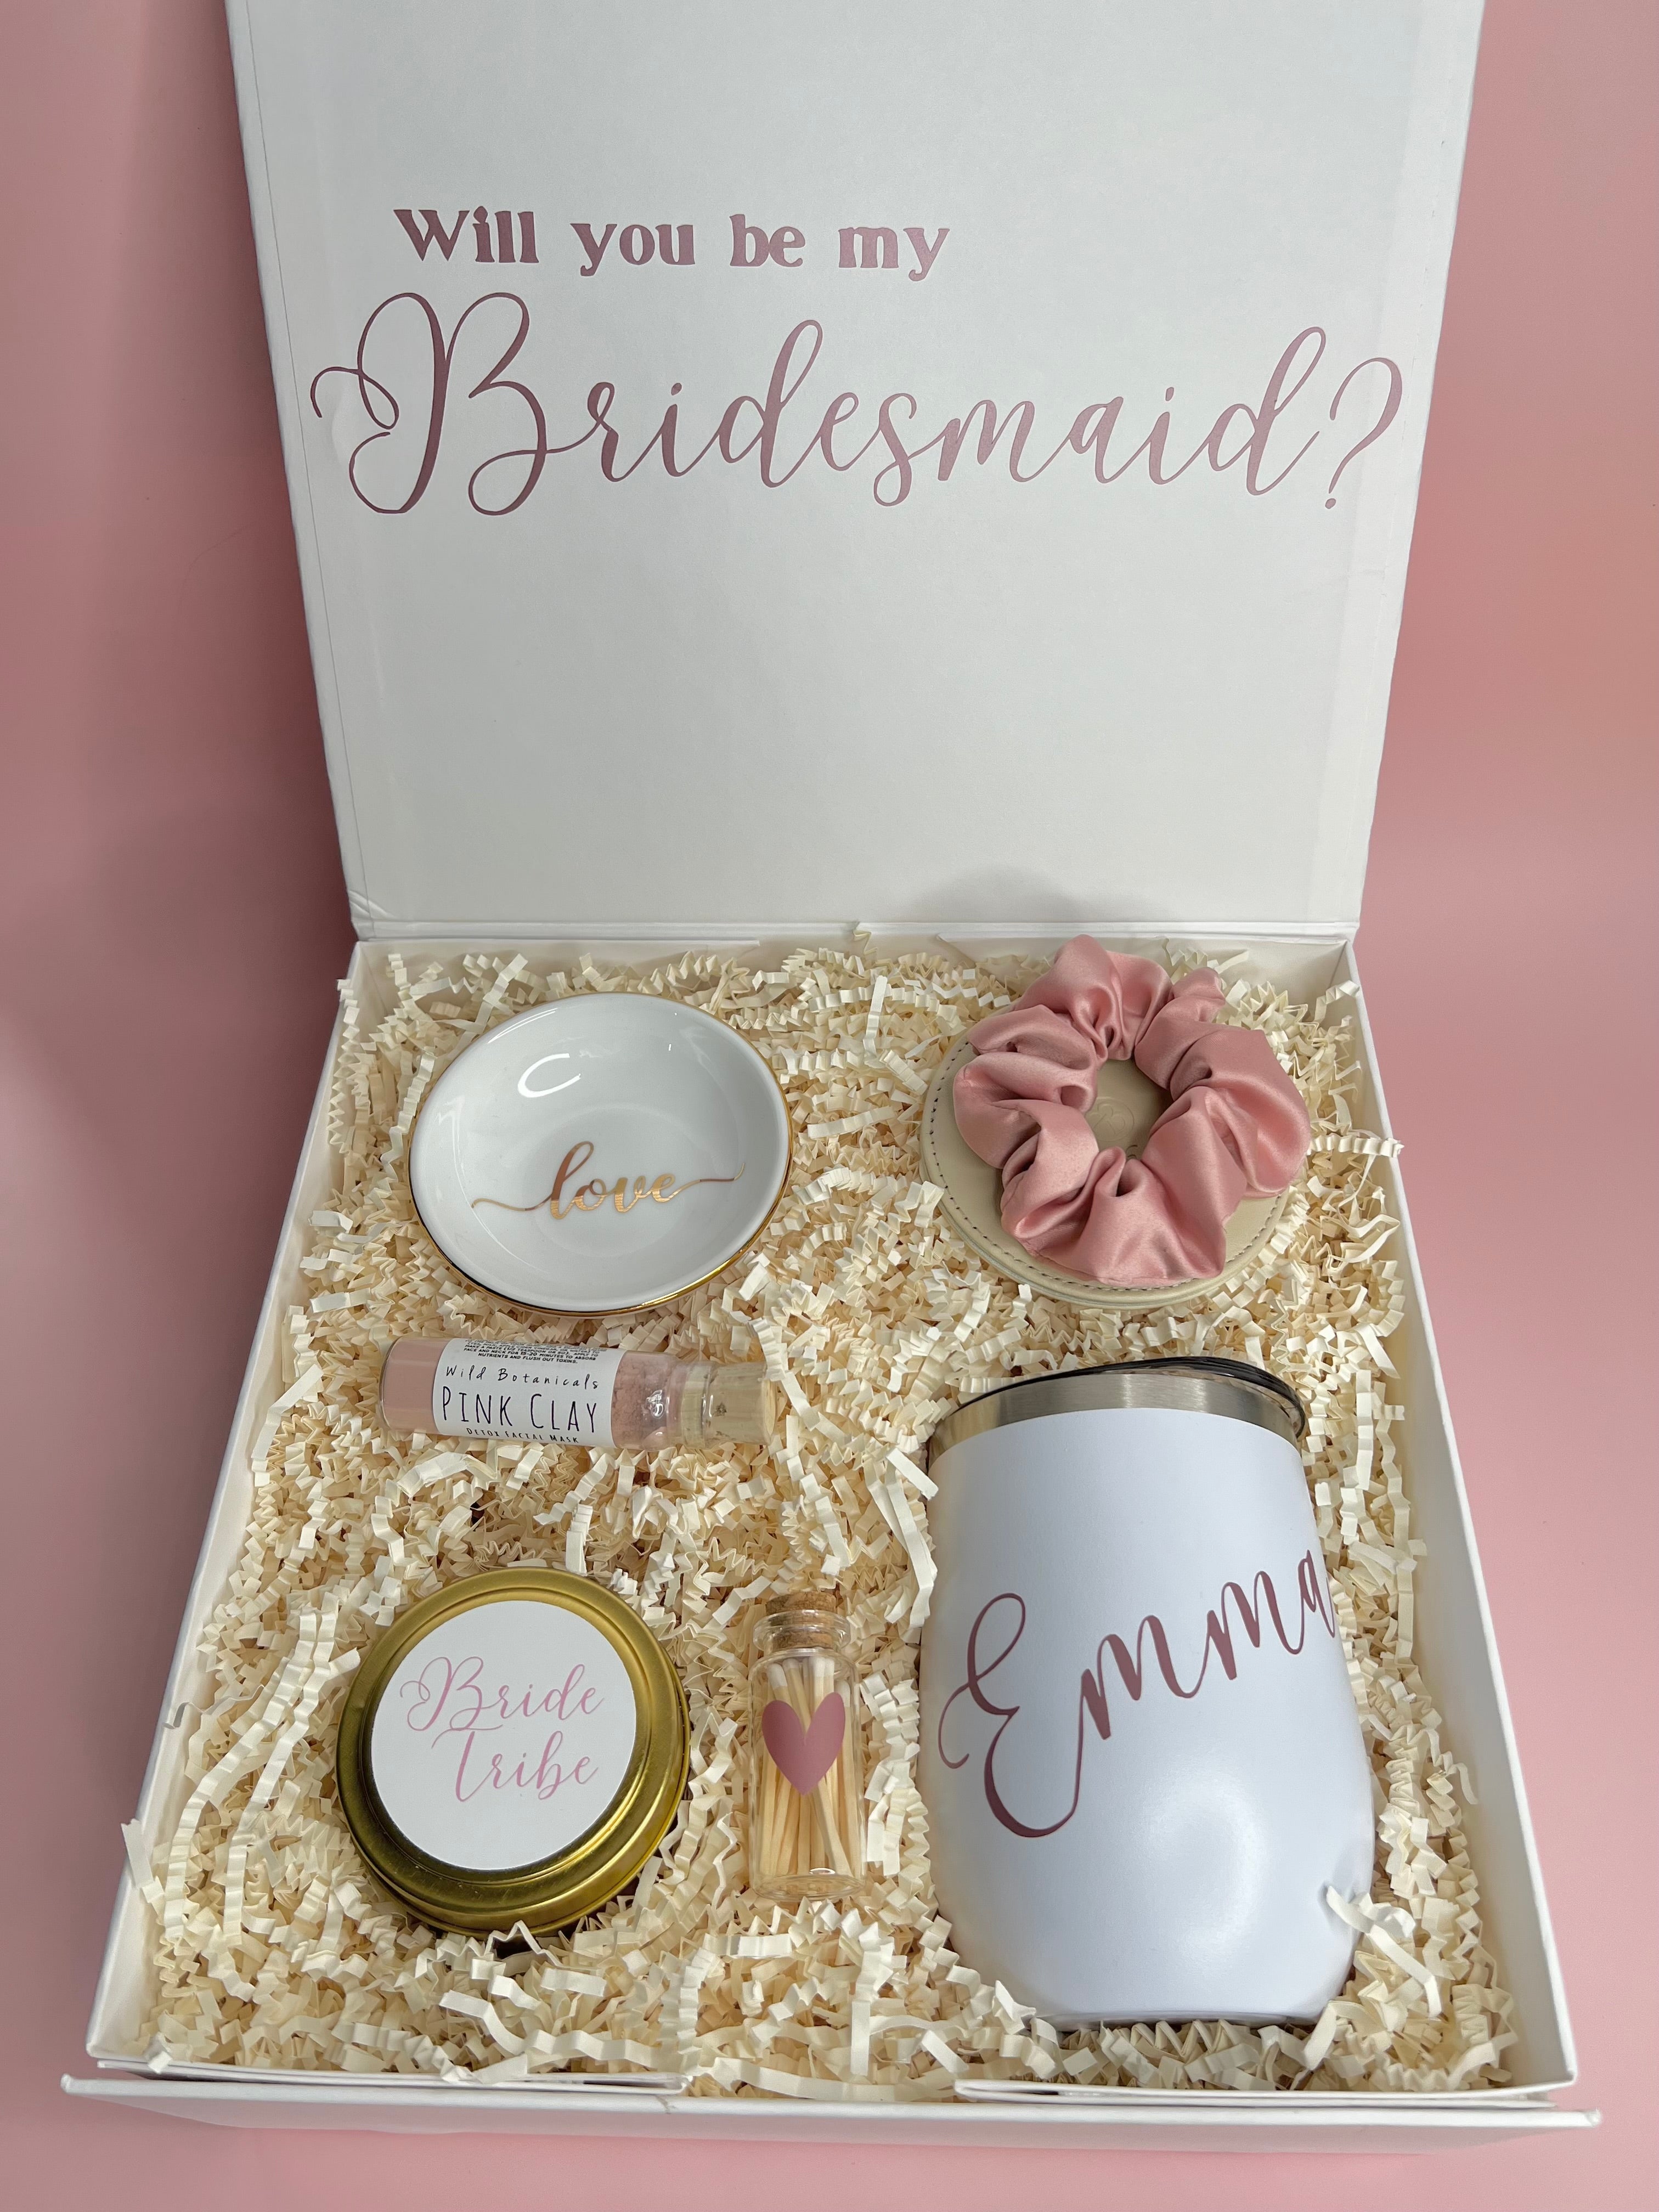 Bridesmaid proposal box-Bridesmaid gift box Bridesmaid gift Bridesmaid gift  box Bridal party gift boxes Gifts for her Wedding party gift set